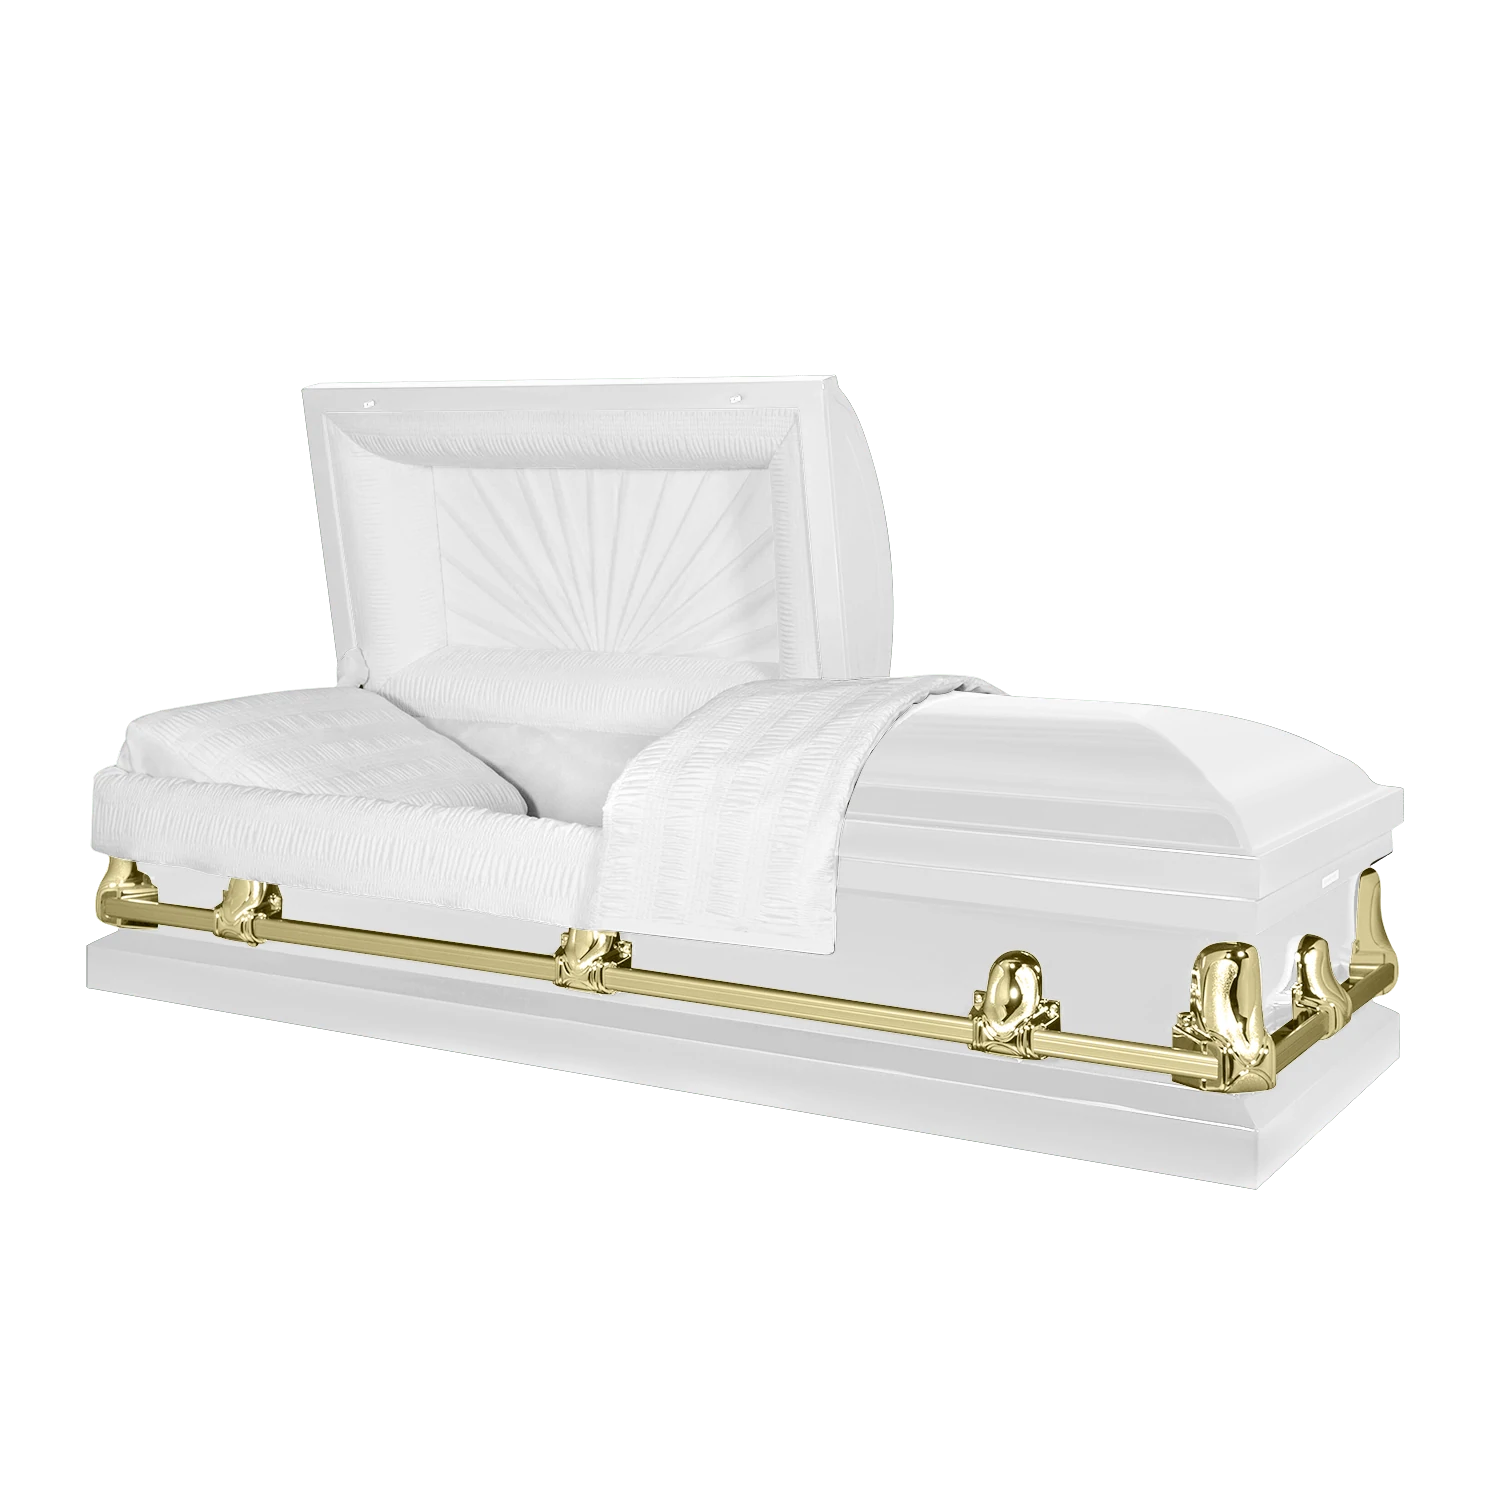 What’s the Difference Between Coffin and Casket?